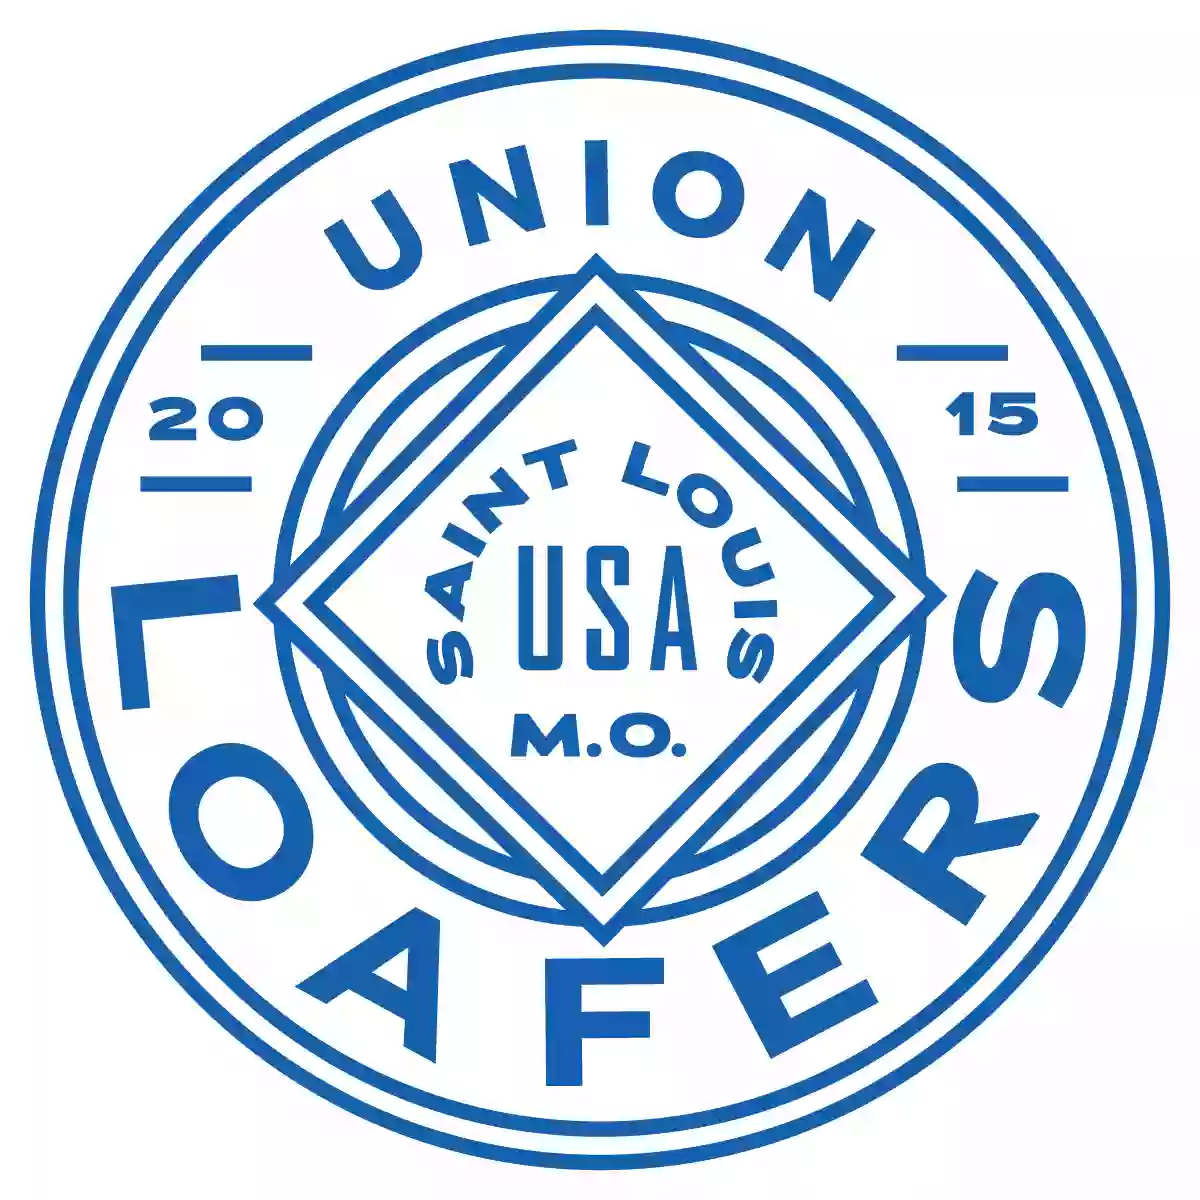 Union Loafers Café and Bread Bakery